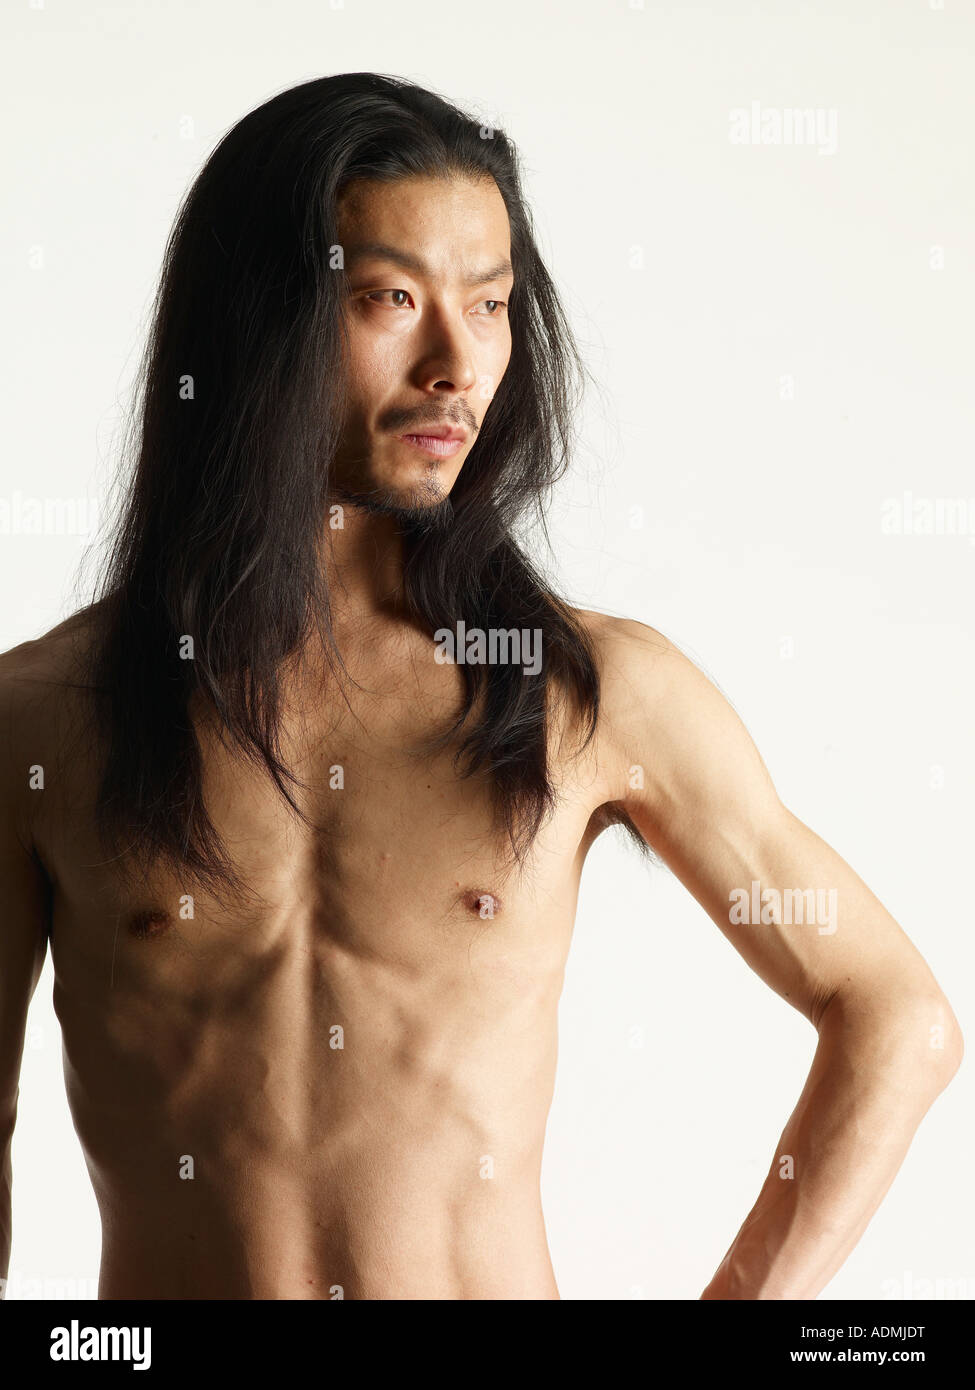 Shirtless young man with long hair hand on hip Stock Photo - Alamy